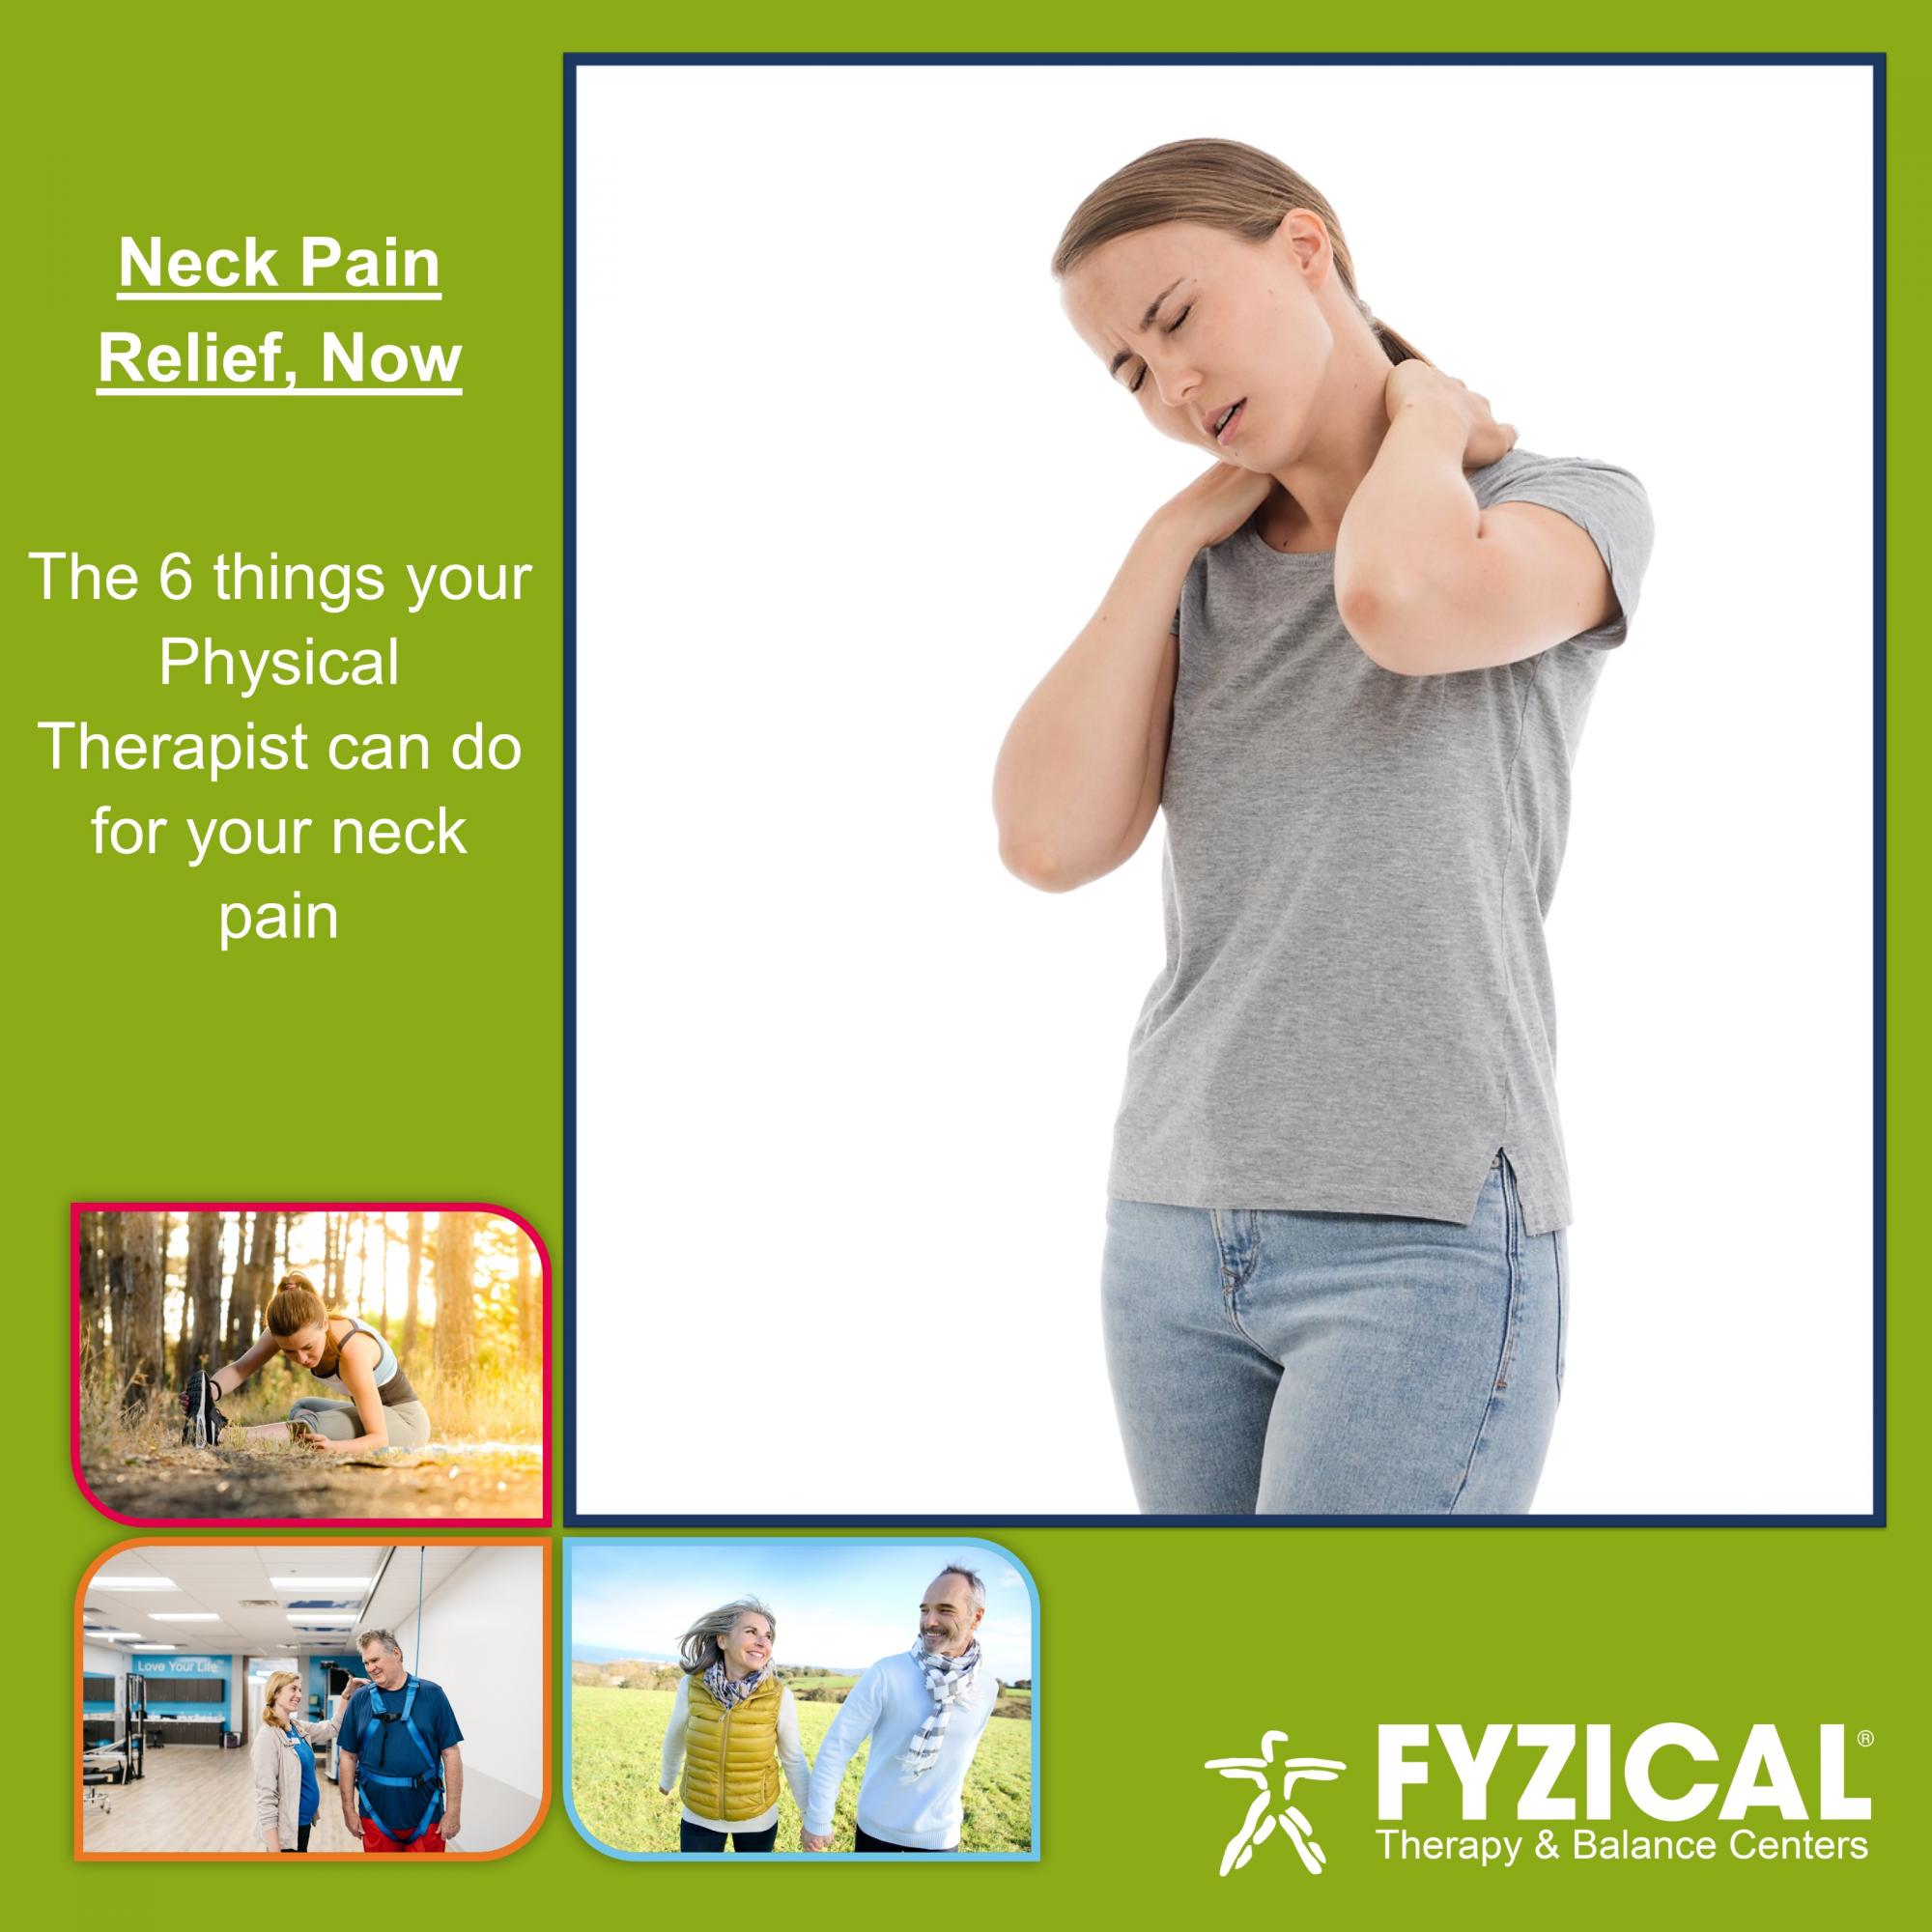 The 6 things your Physical Therapist Can do to Relieve your Neck Pain